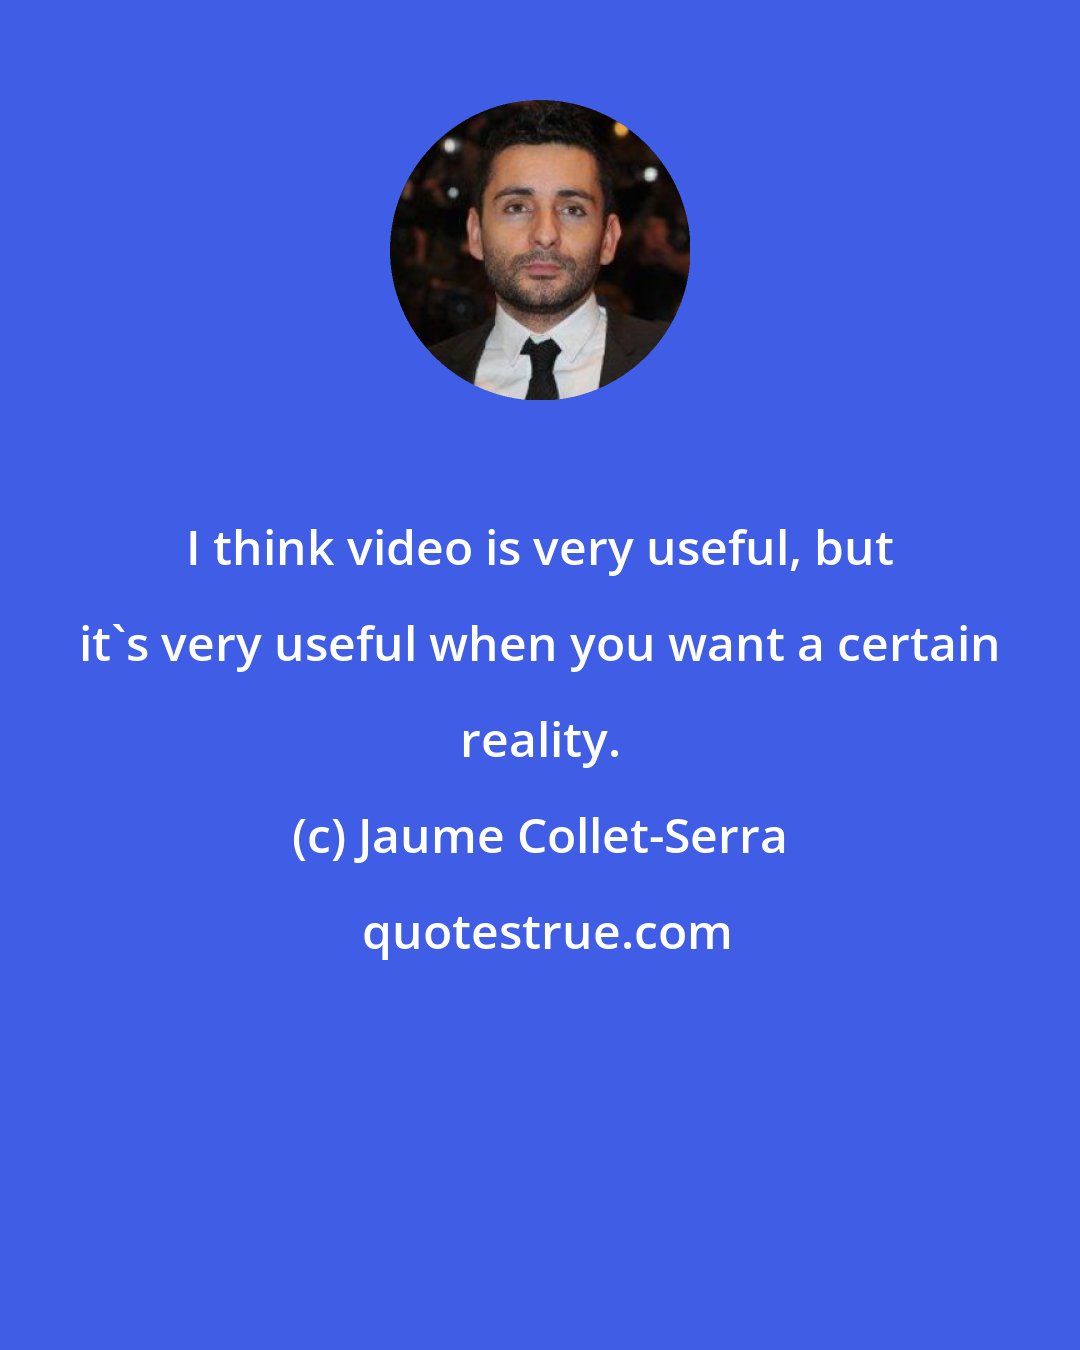 Jaume Collet-Serra: I think video is very useful, but it's very useful when you want a certain reality.